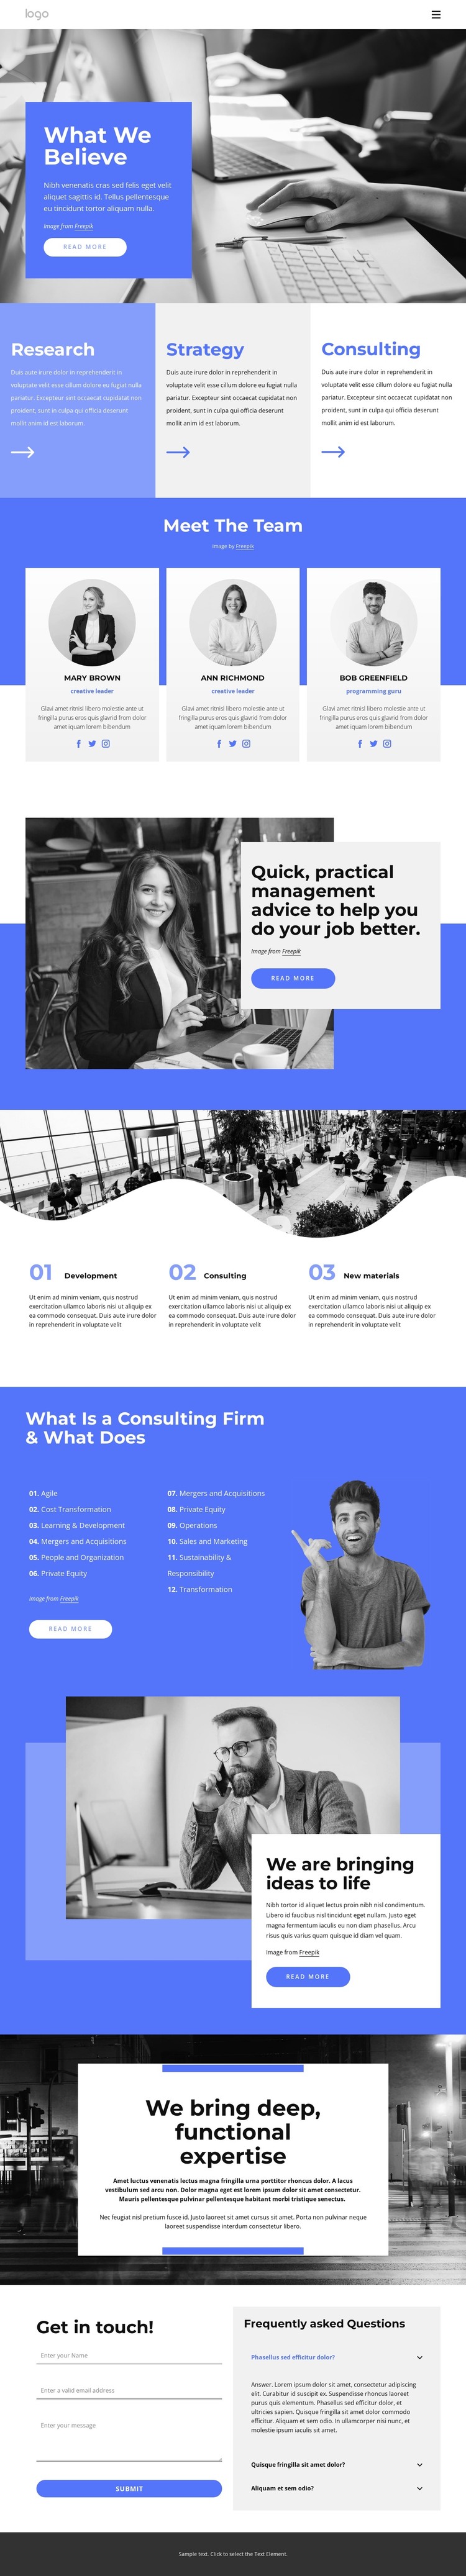 Research strategy group HTML Template